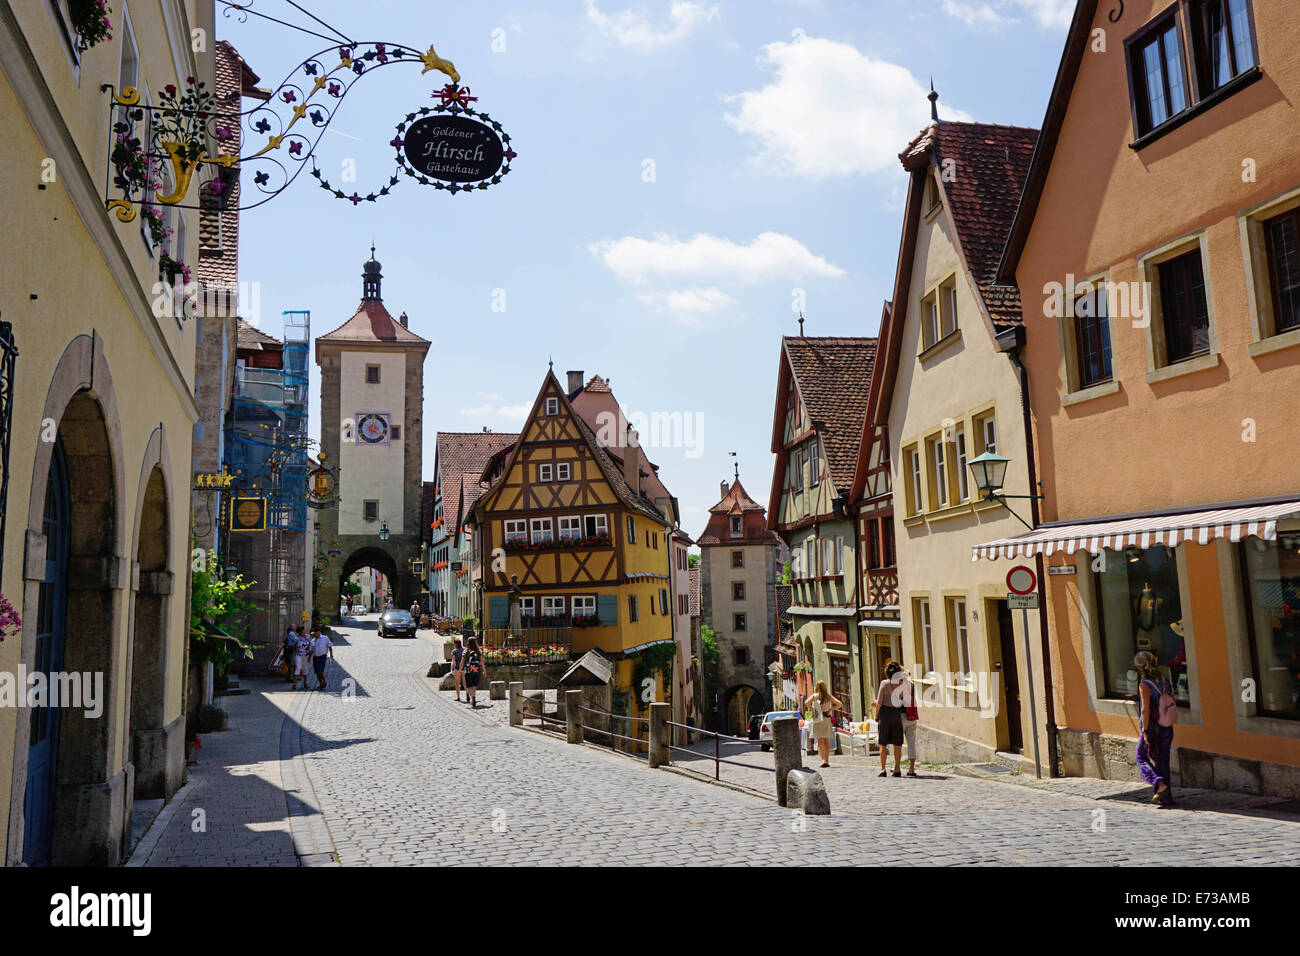 View of Siebers Tower on left and the Kobokzell gate on right, Rothenburg ob der Tauber, Romantic Road, Bavaria, Germany Stock Photo